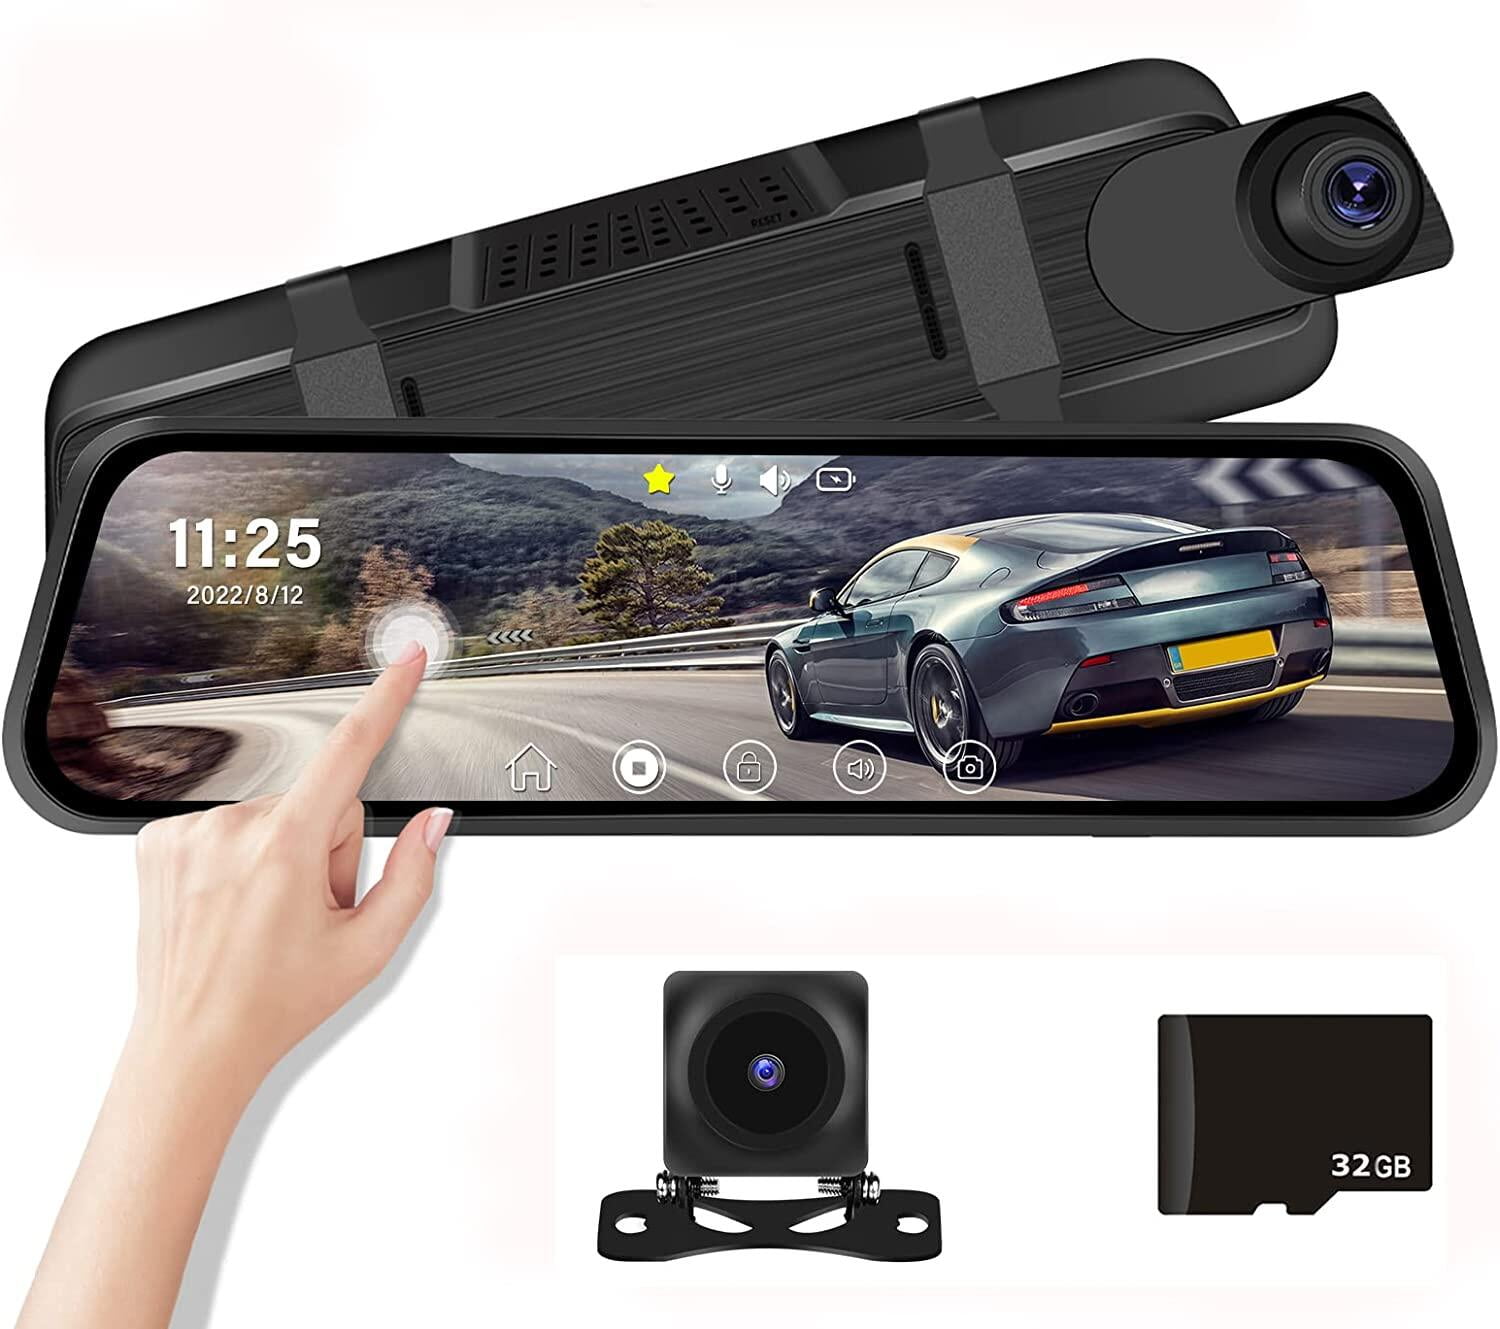  Fufafayo Smart Dash Cam, 1080P Full Hd, Smart Dash Camera for  Cars,Ring Car Cam， Car On-Dash Mounted Cameras，Dash Cam Front and Rear，Built-in  G-Sensor, Wdr, Powerful Night Vision : Electronics